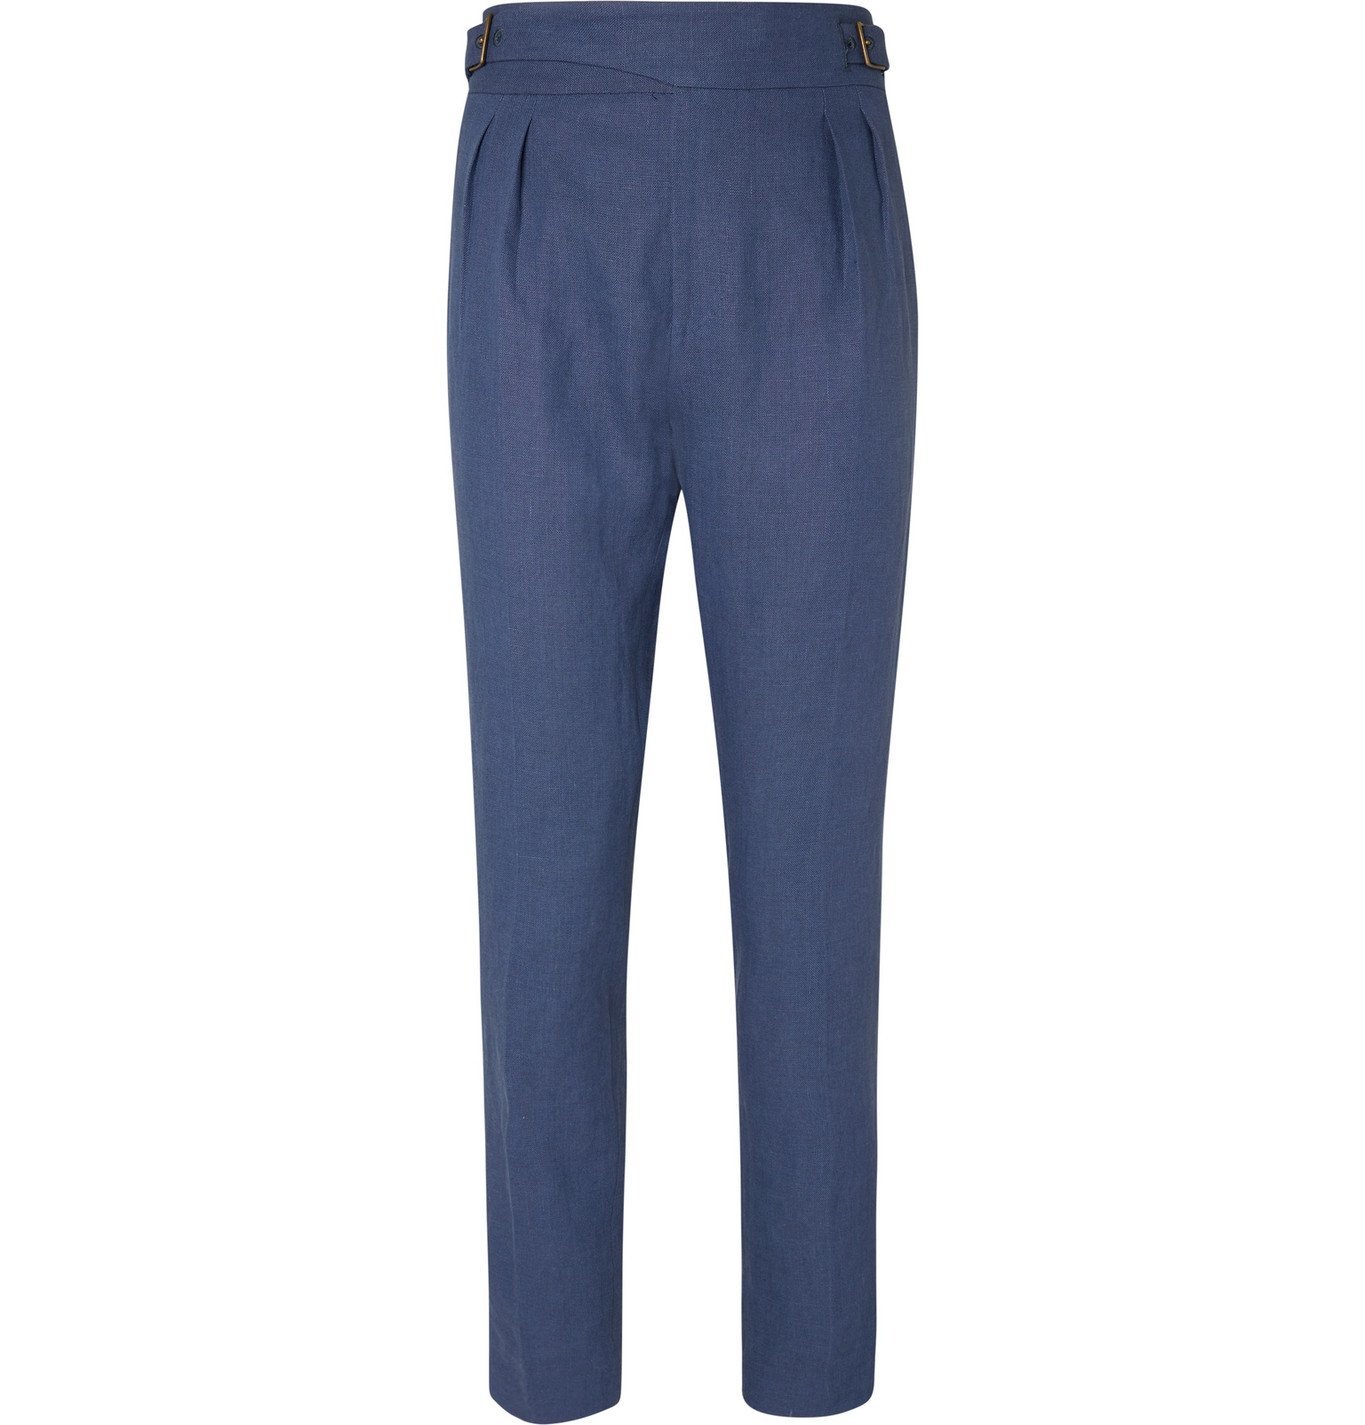 Anderson & Sheppard - Pleated Linen Trousers - Blue Anderson & Sheppard